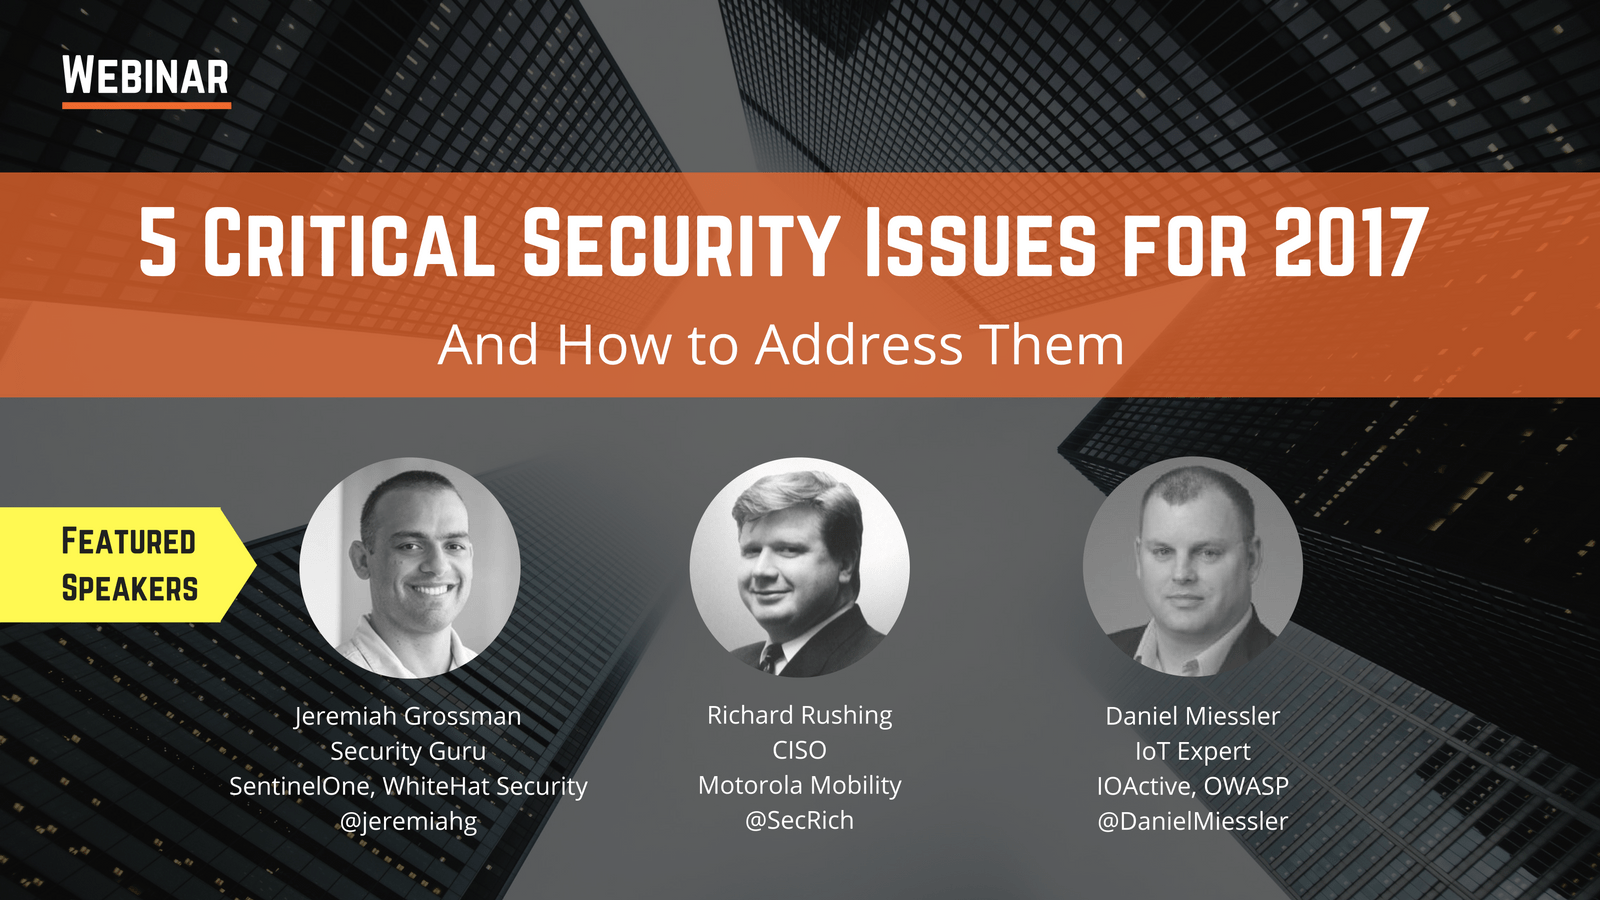 2017 Predictions: Three Experts Discuss Security Challenges for the Coming Year